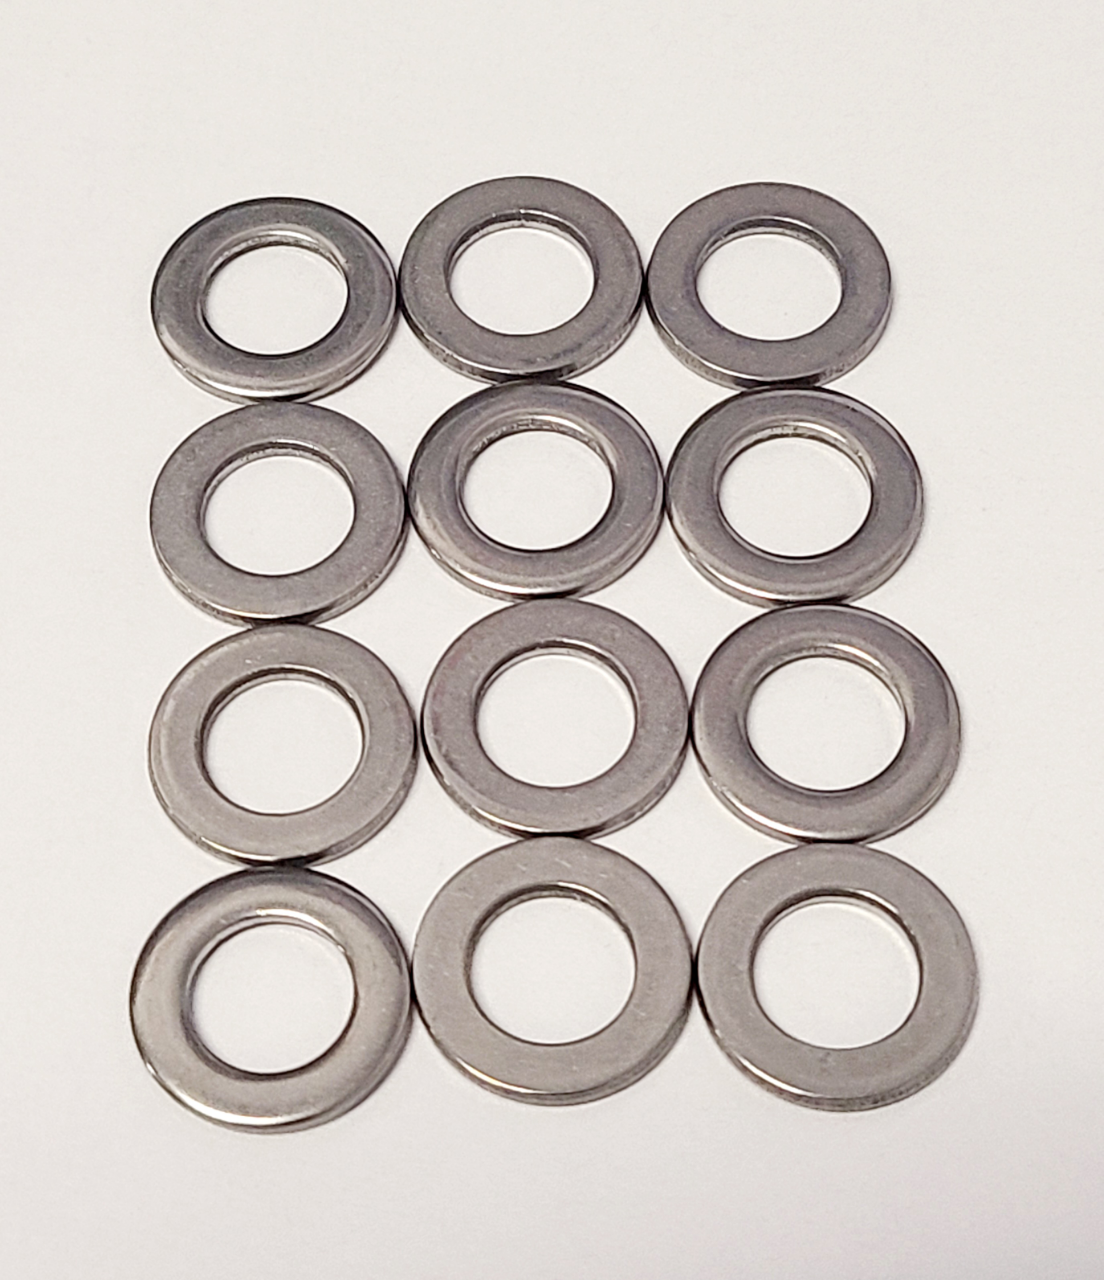 Wheel Nut Washers: 8mm - Small OD (12-Pack) - STAINLESS STEEL